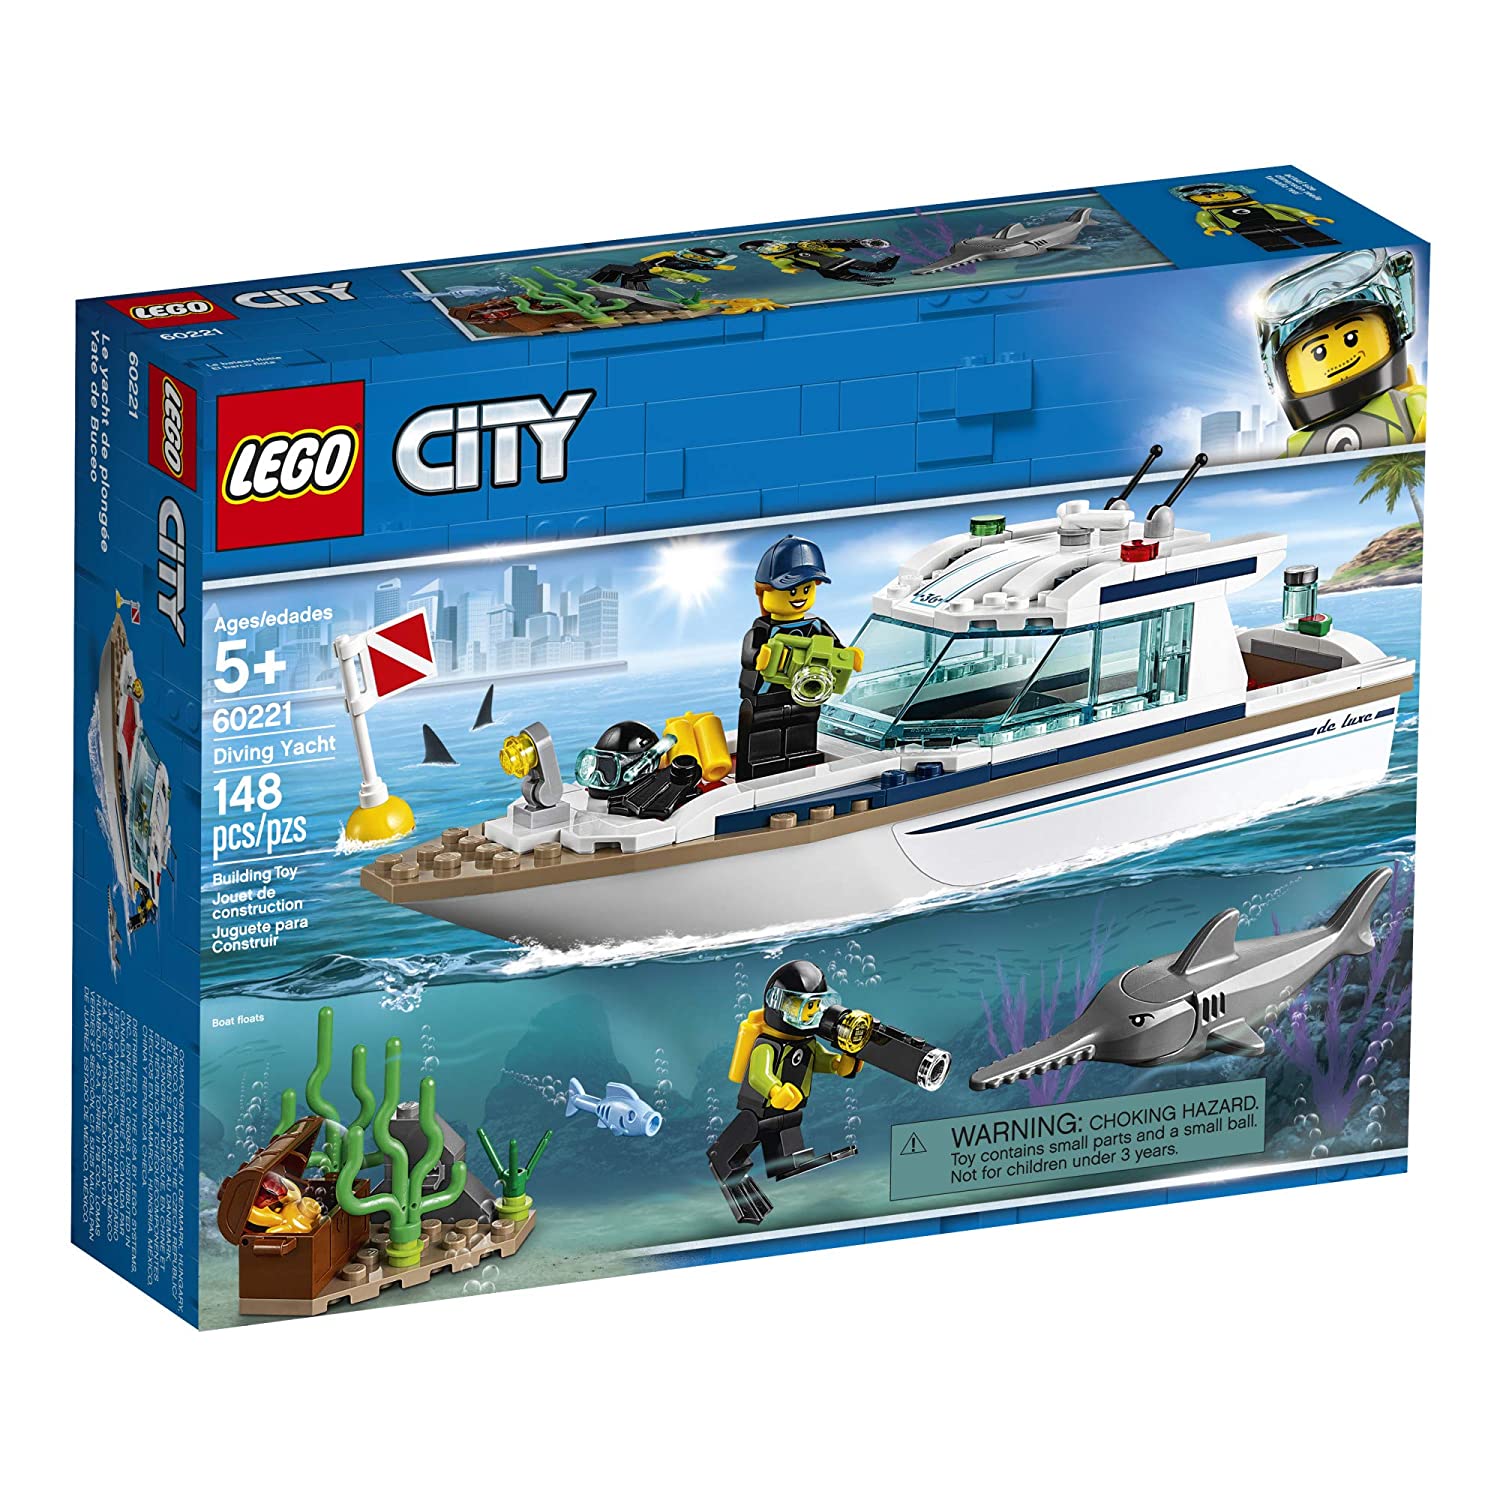 Top 9 Best LEGO Boat Sets Reviews in 2022 9